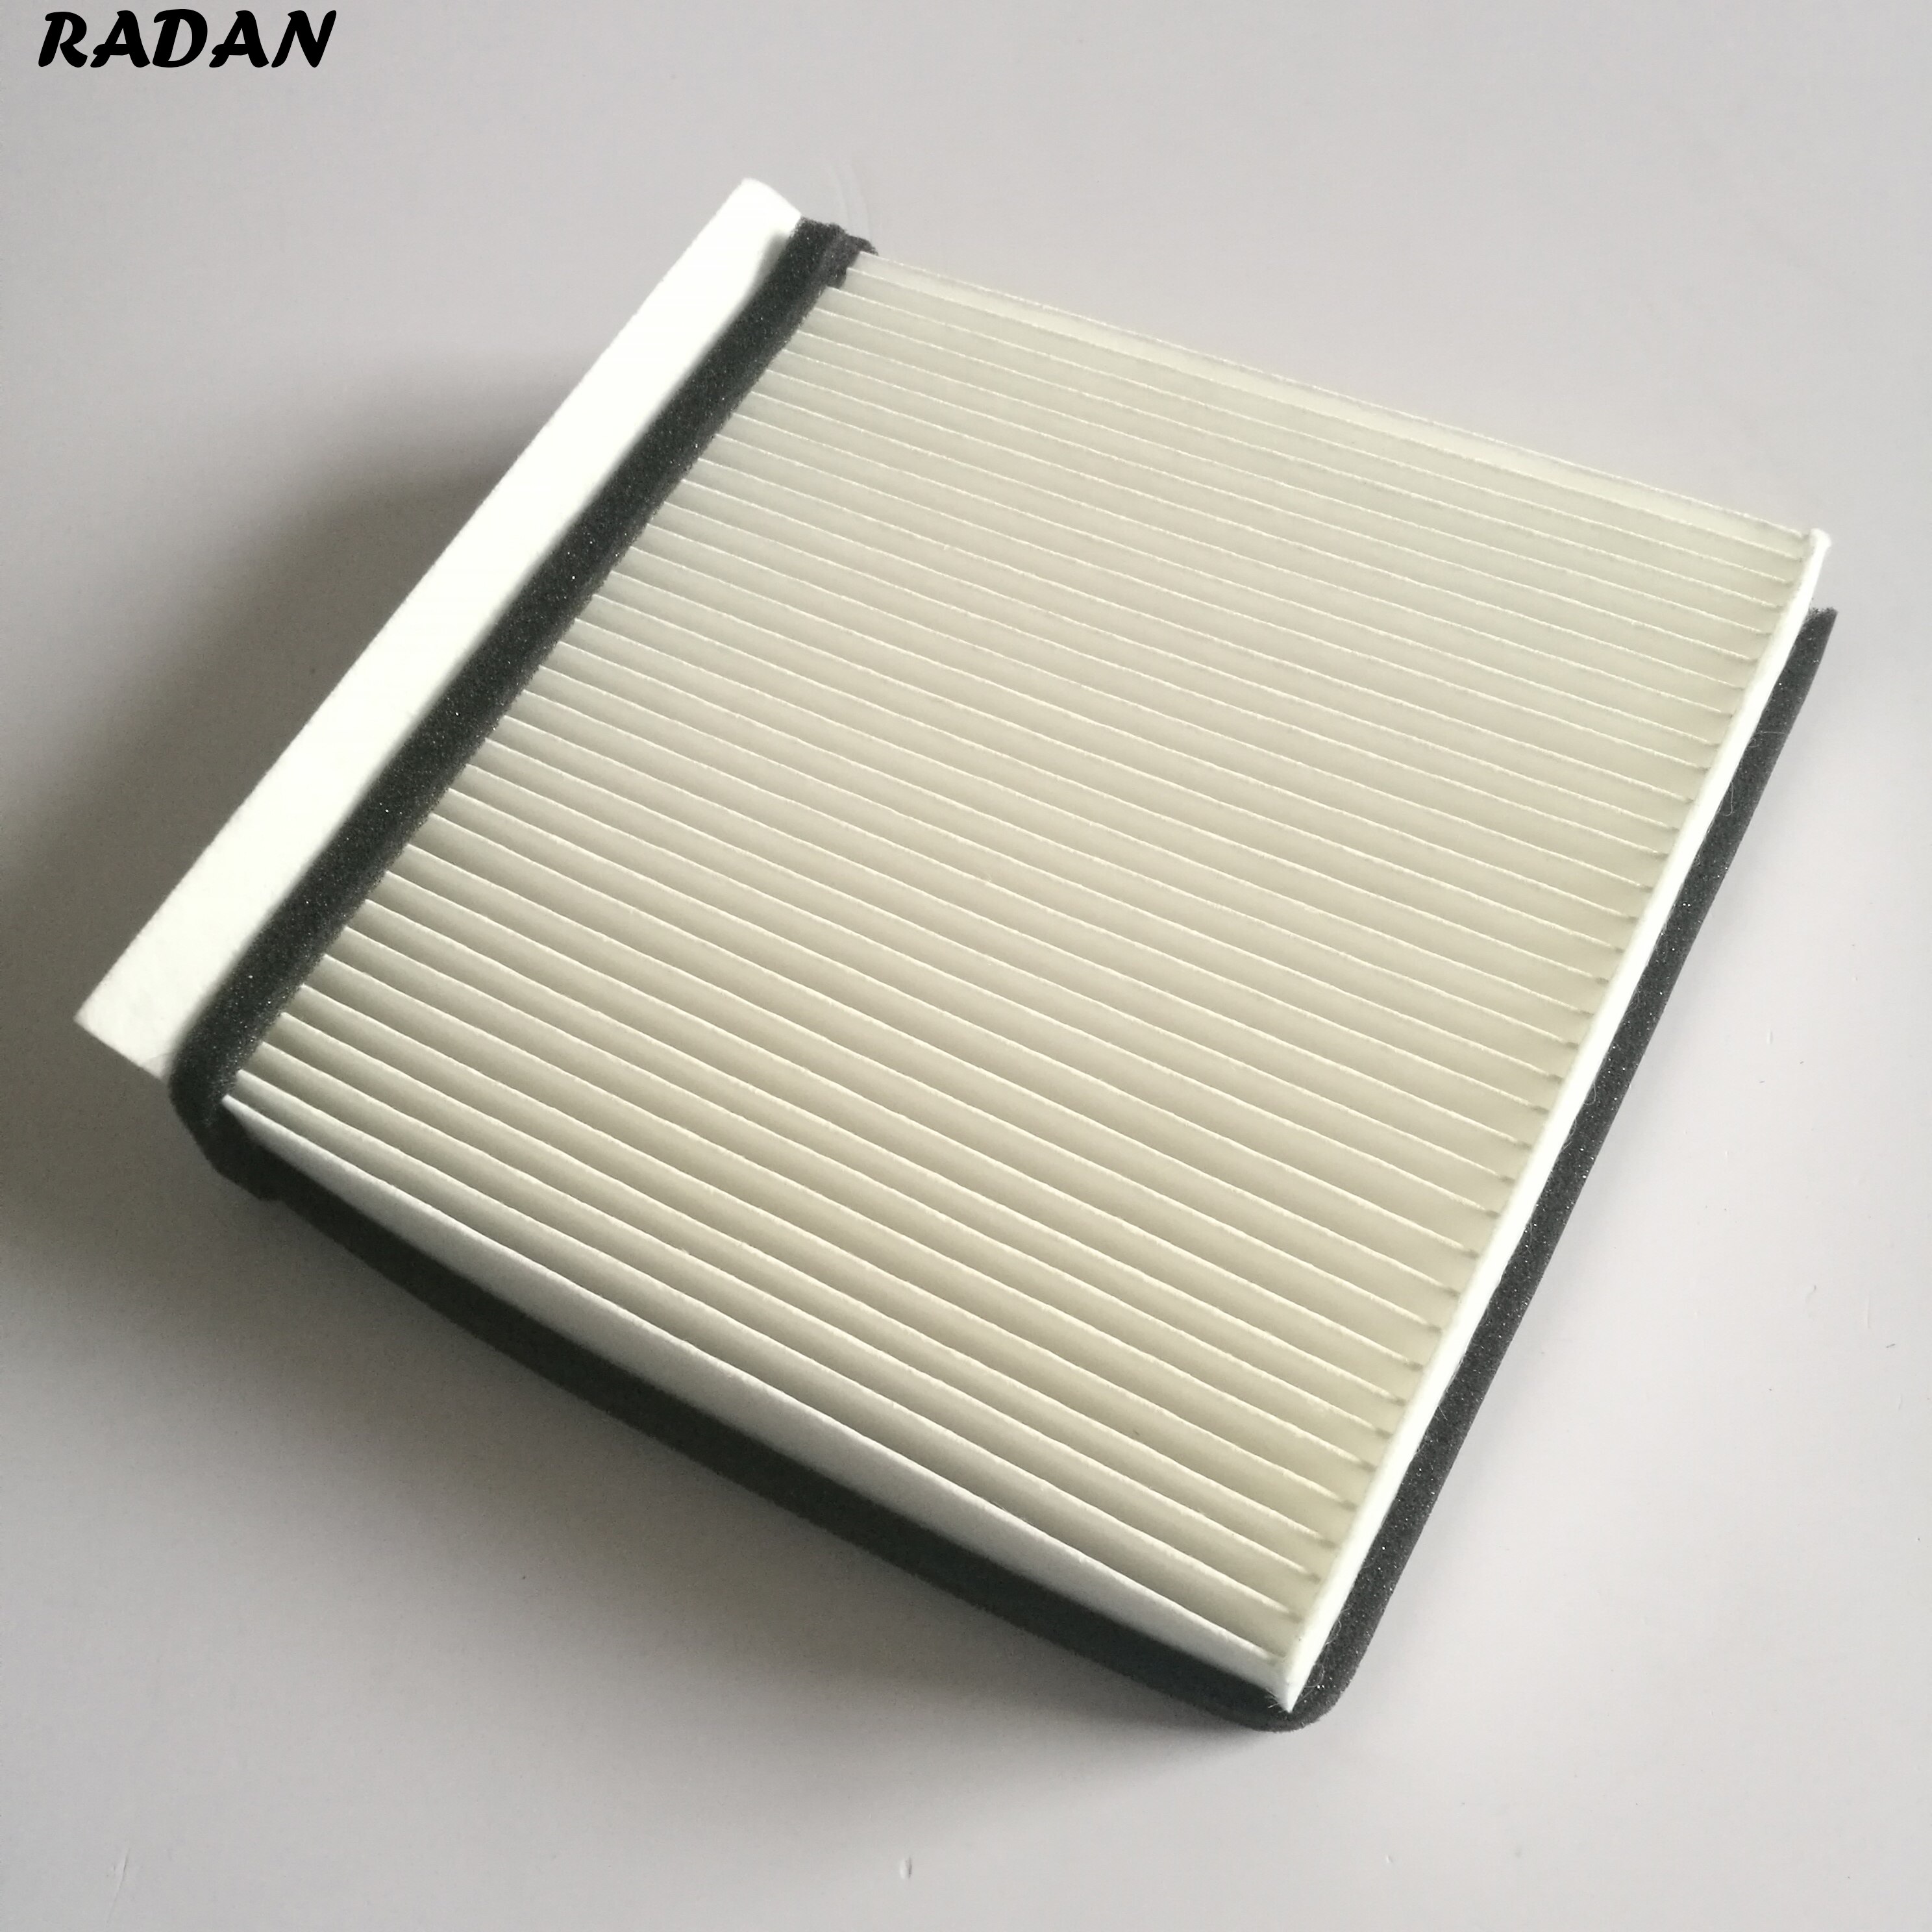 Airconditioning Filter A/C Filter Voor Mg Zs 15S4C Motor 1.5L